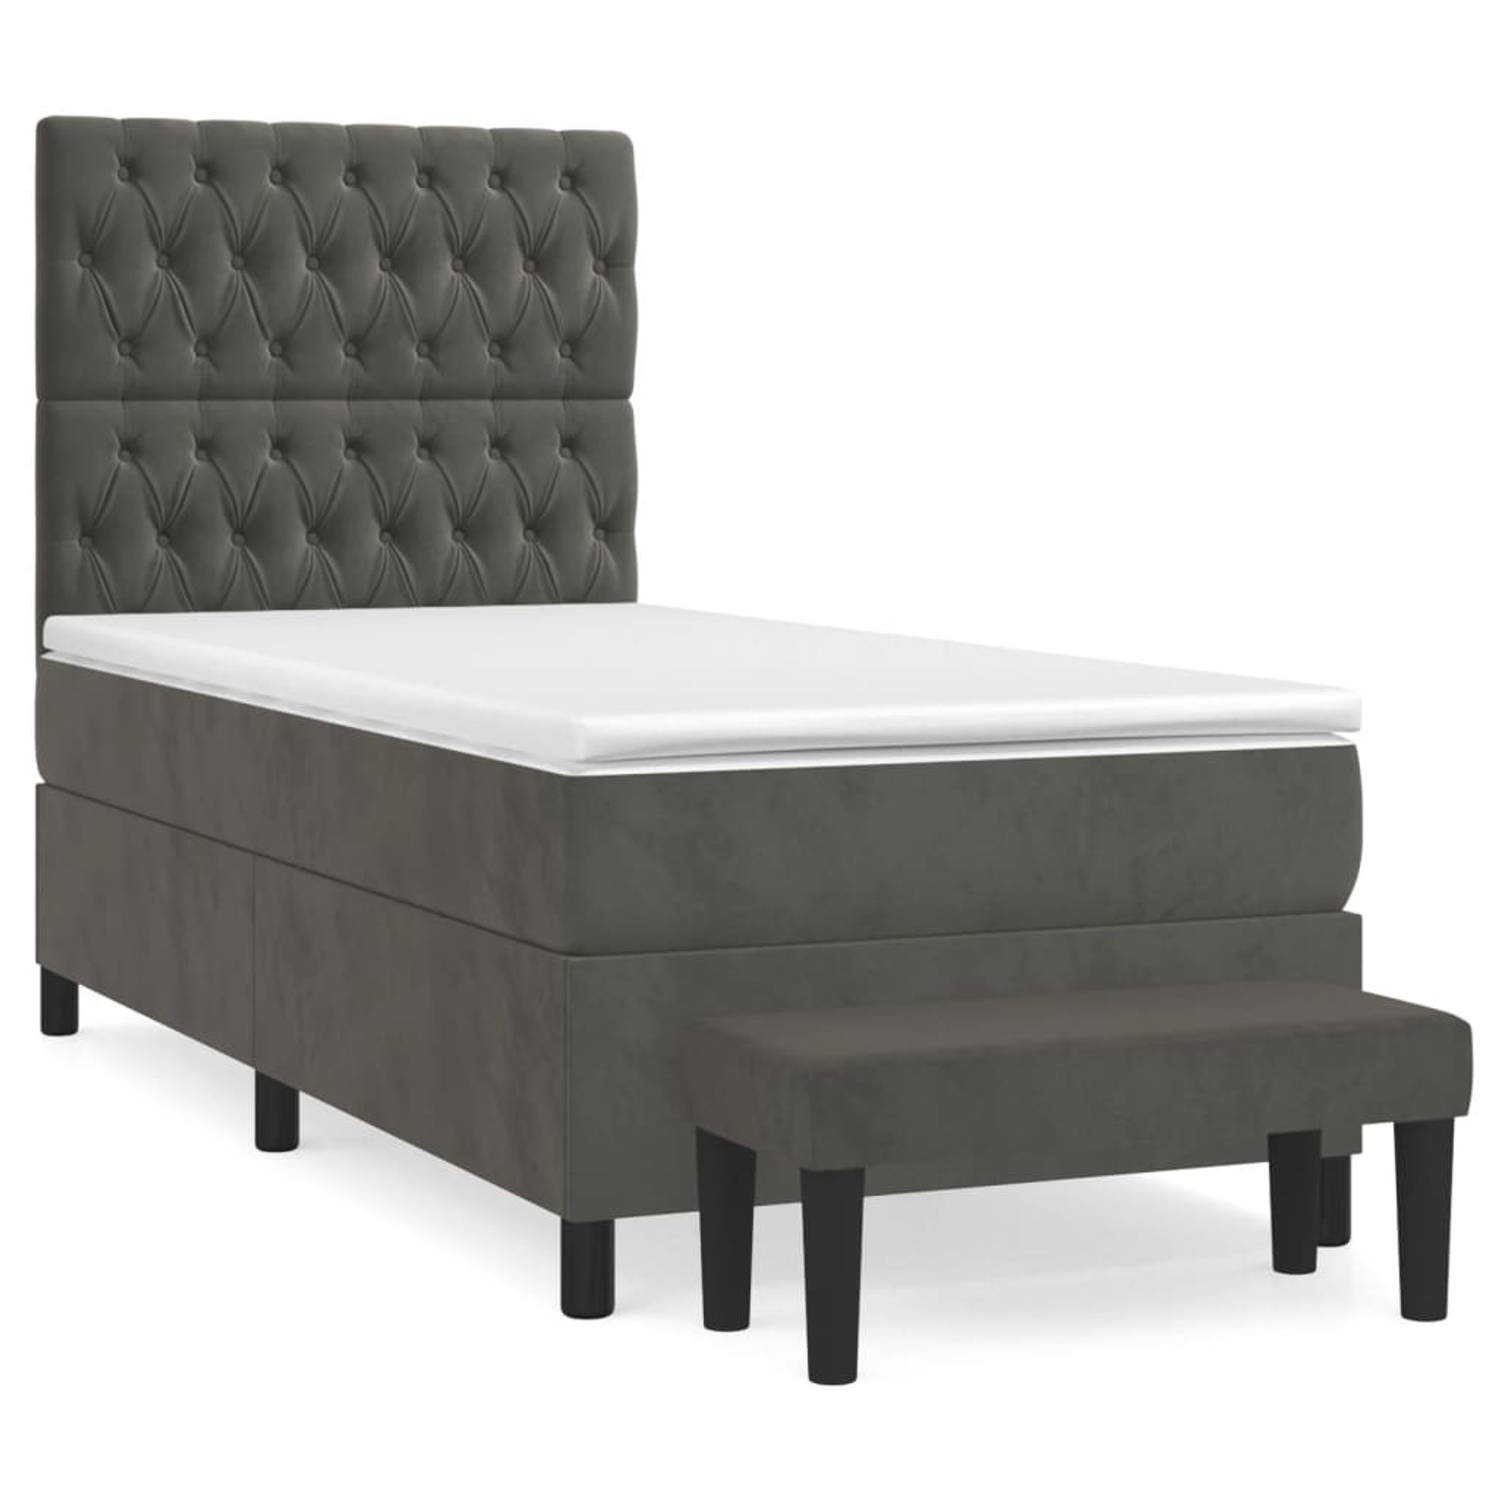 The Living Store Boxspringbed - Comfort - Bed - 193 x 90 x 118/128 cm - Donkergrijs polyester